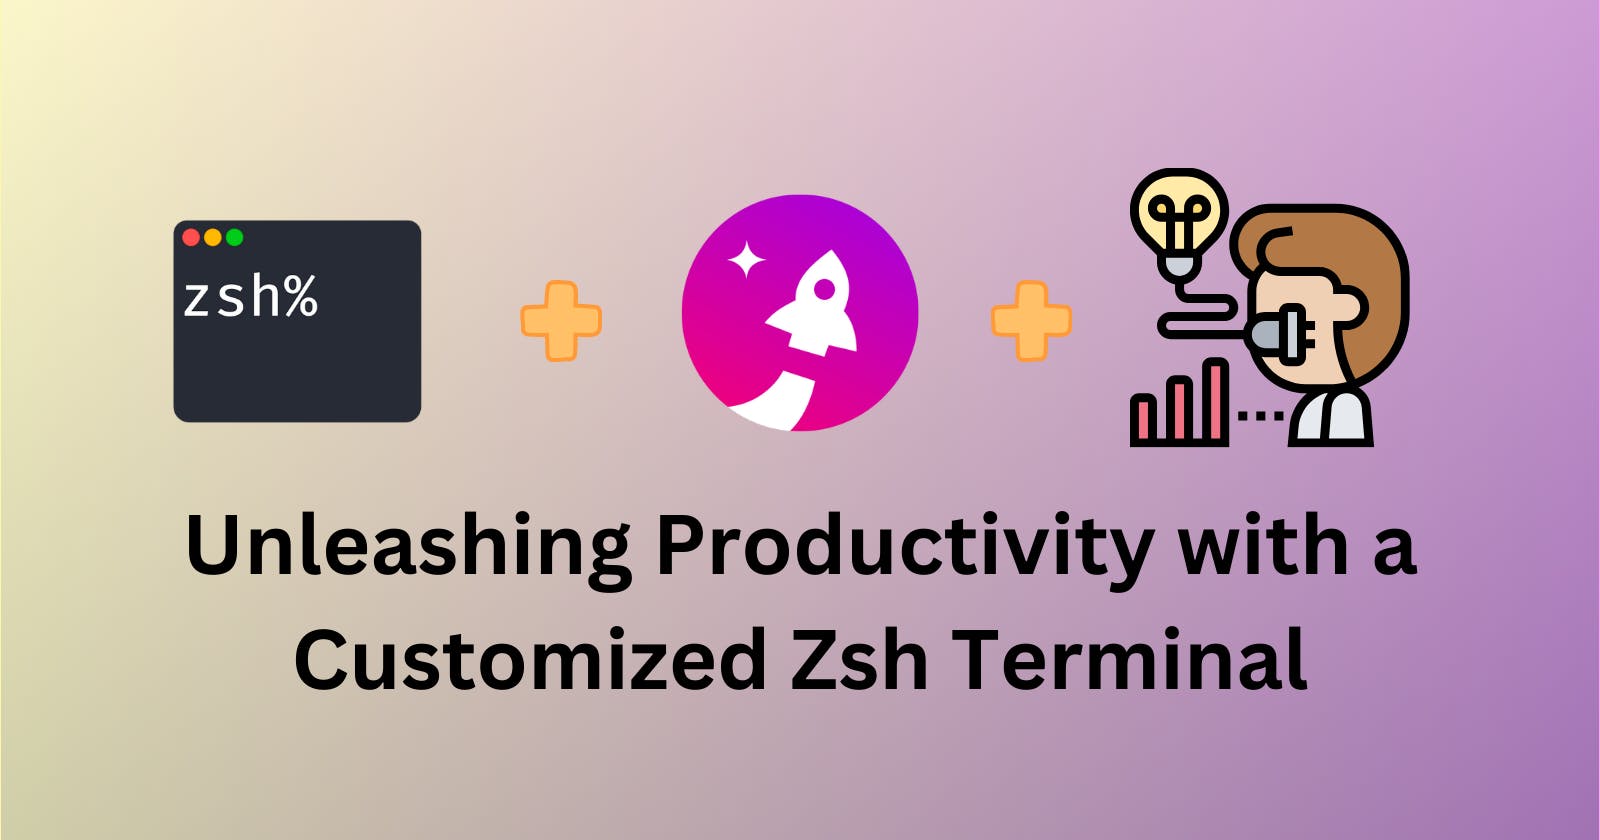 Unleashing Productivity with a Customized Zsh Terminal